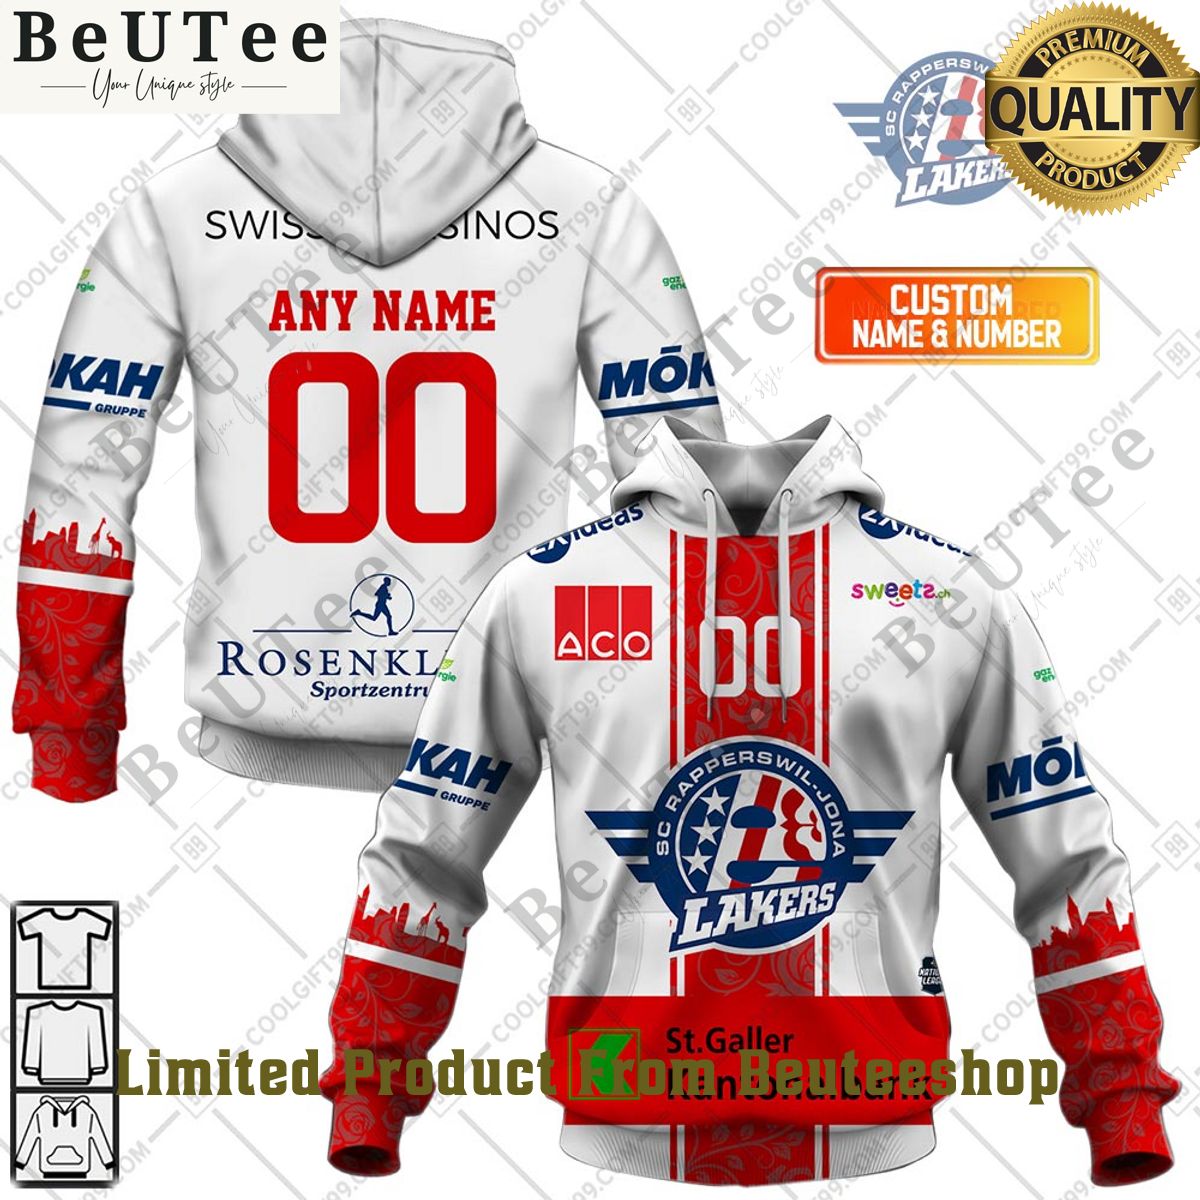 personalized name and number nl hockey scrj lakers away jersey style printed hoodie shirt 1 VF9NI.jpg